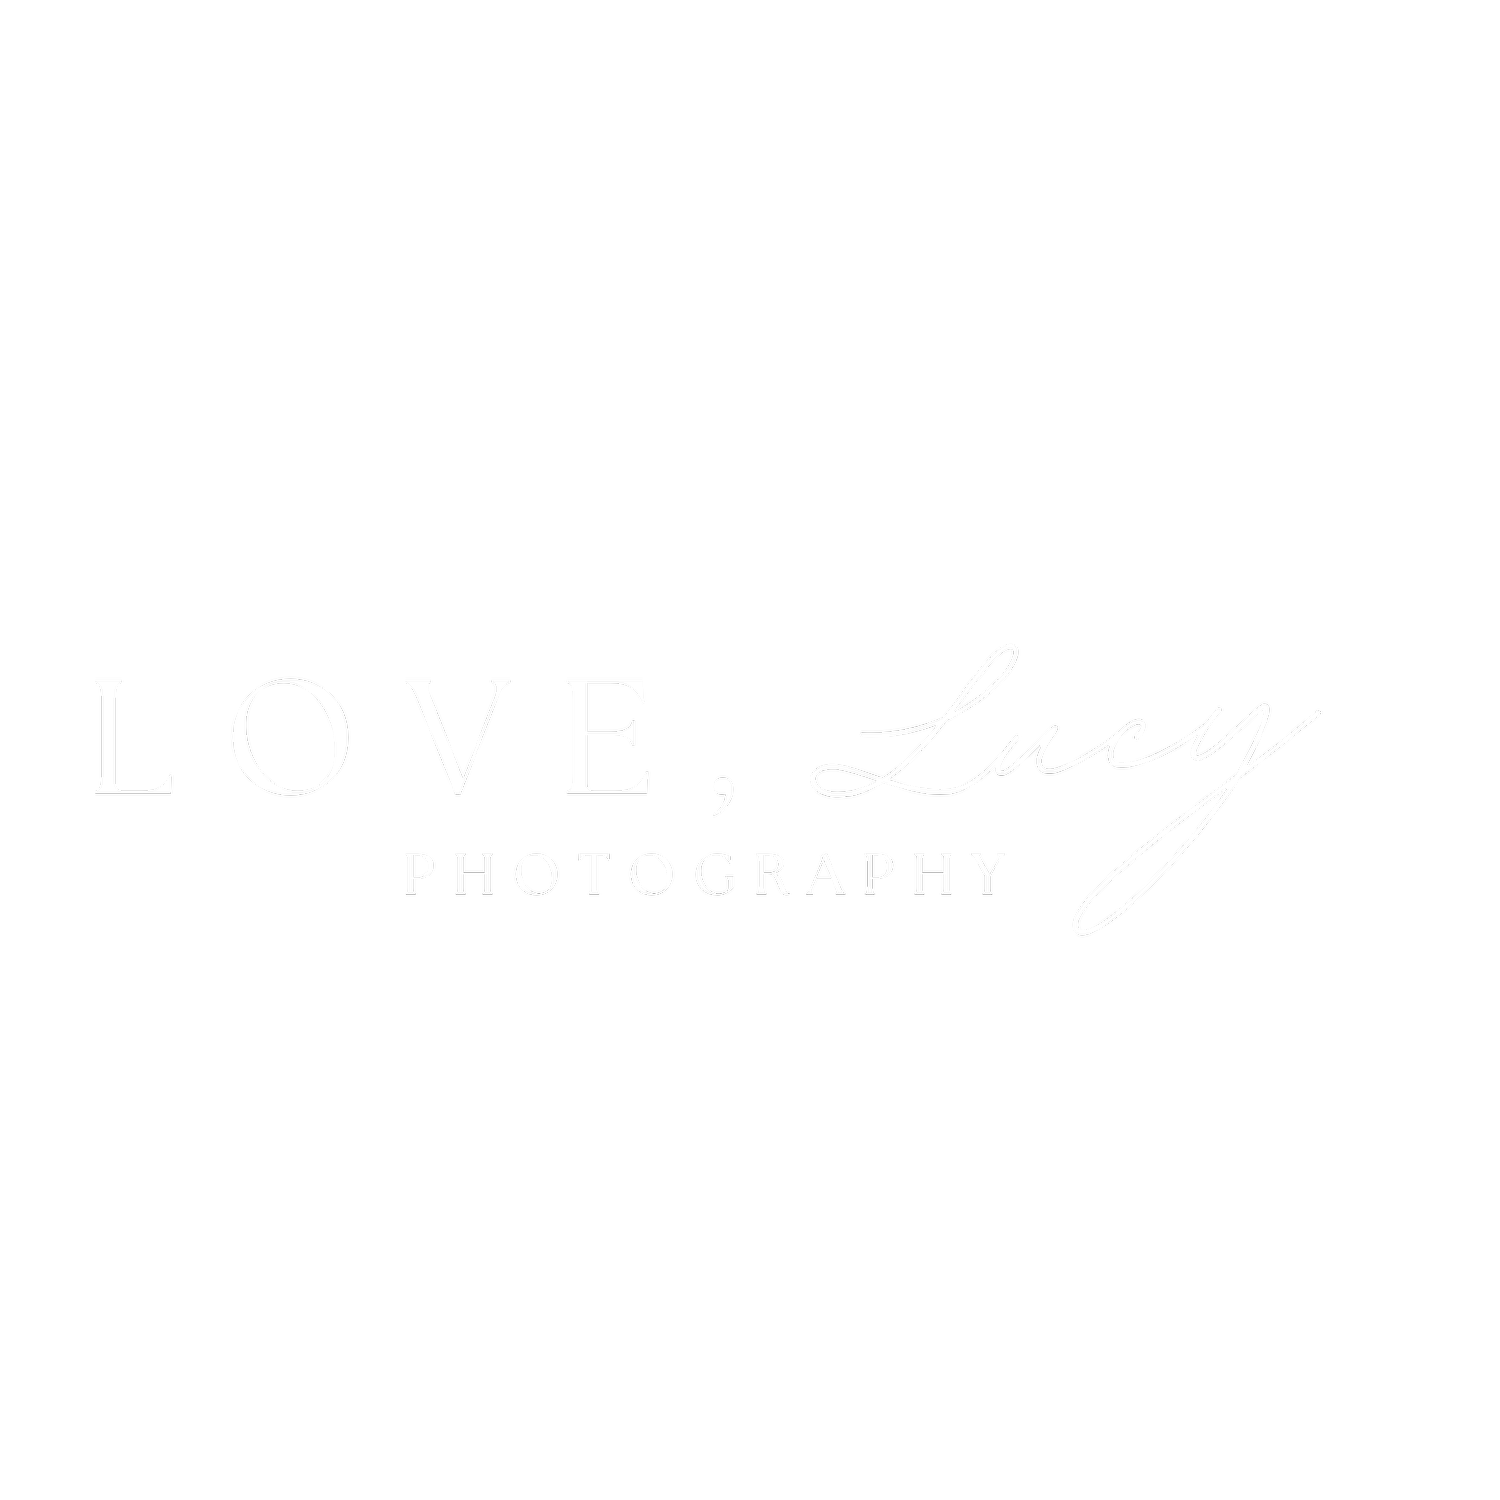 LoveLucy Photography